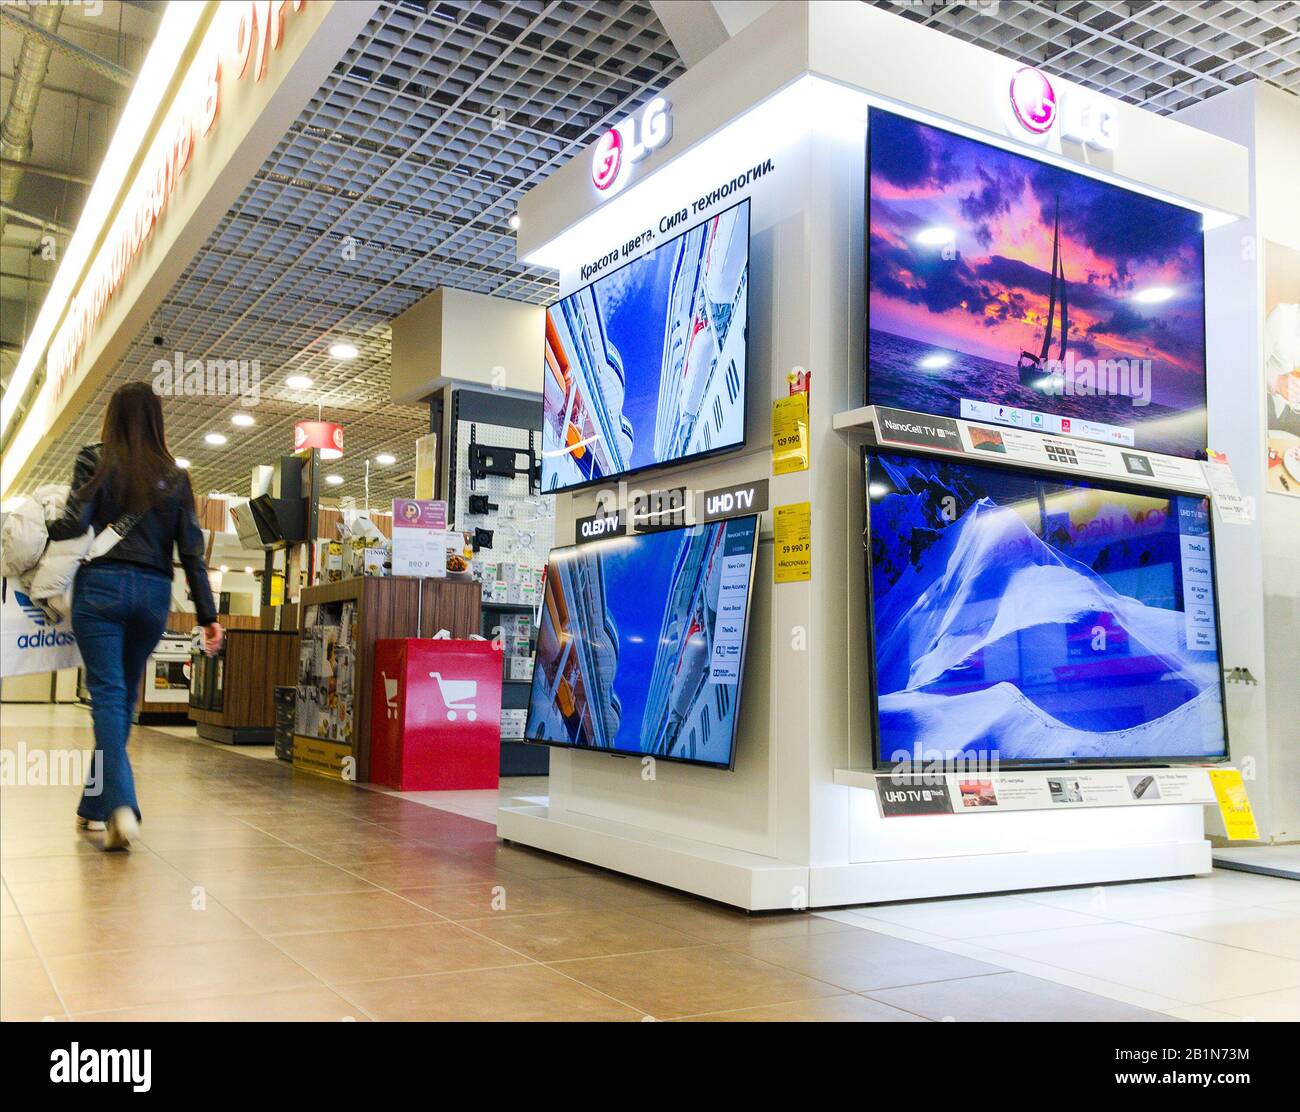 2020: LG QLED UHD 8k TVs, shows the demo picture in an electronic shop Stock Photo